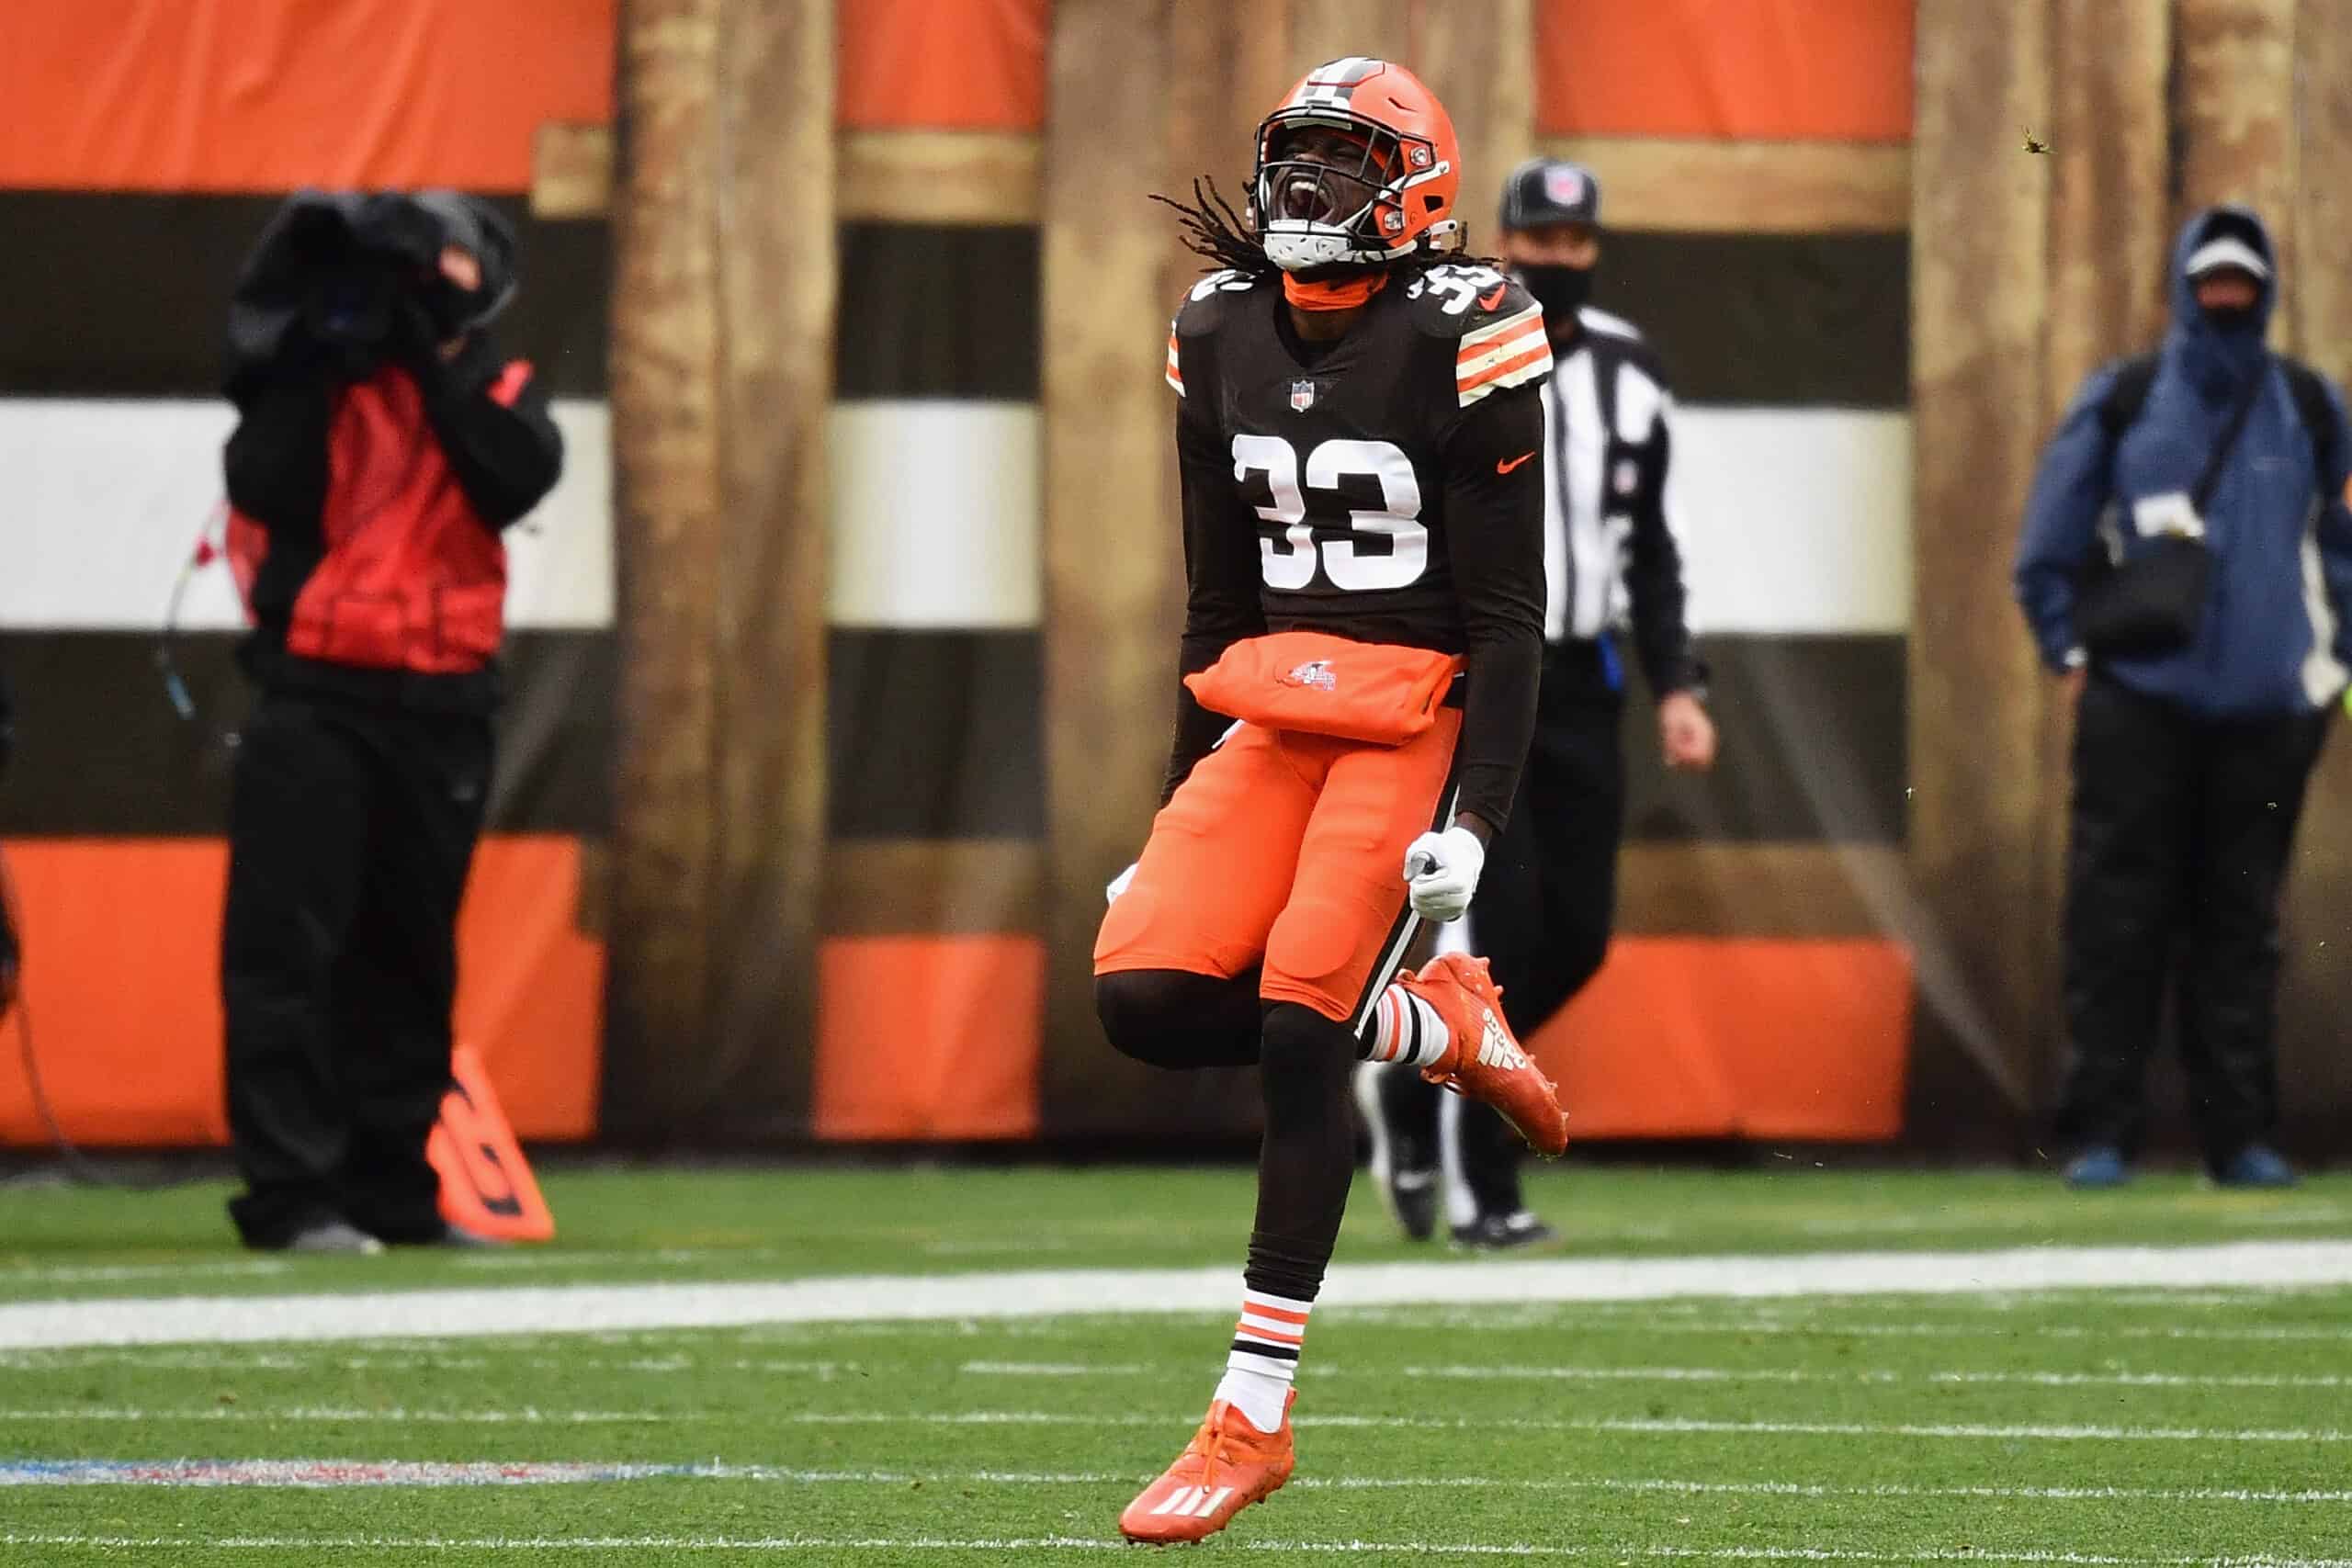 Defensive back Ronnie Harrison #33 of the Cleveland Browns reacts during the first half of the NFL game against the Las Vegas Raiders at FirstEnergy Stadium on November 01, 2020 in Cleveland, Ohio.